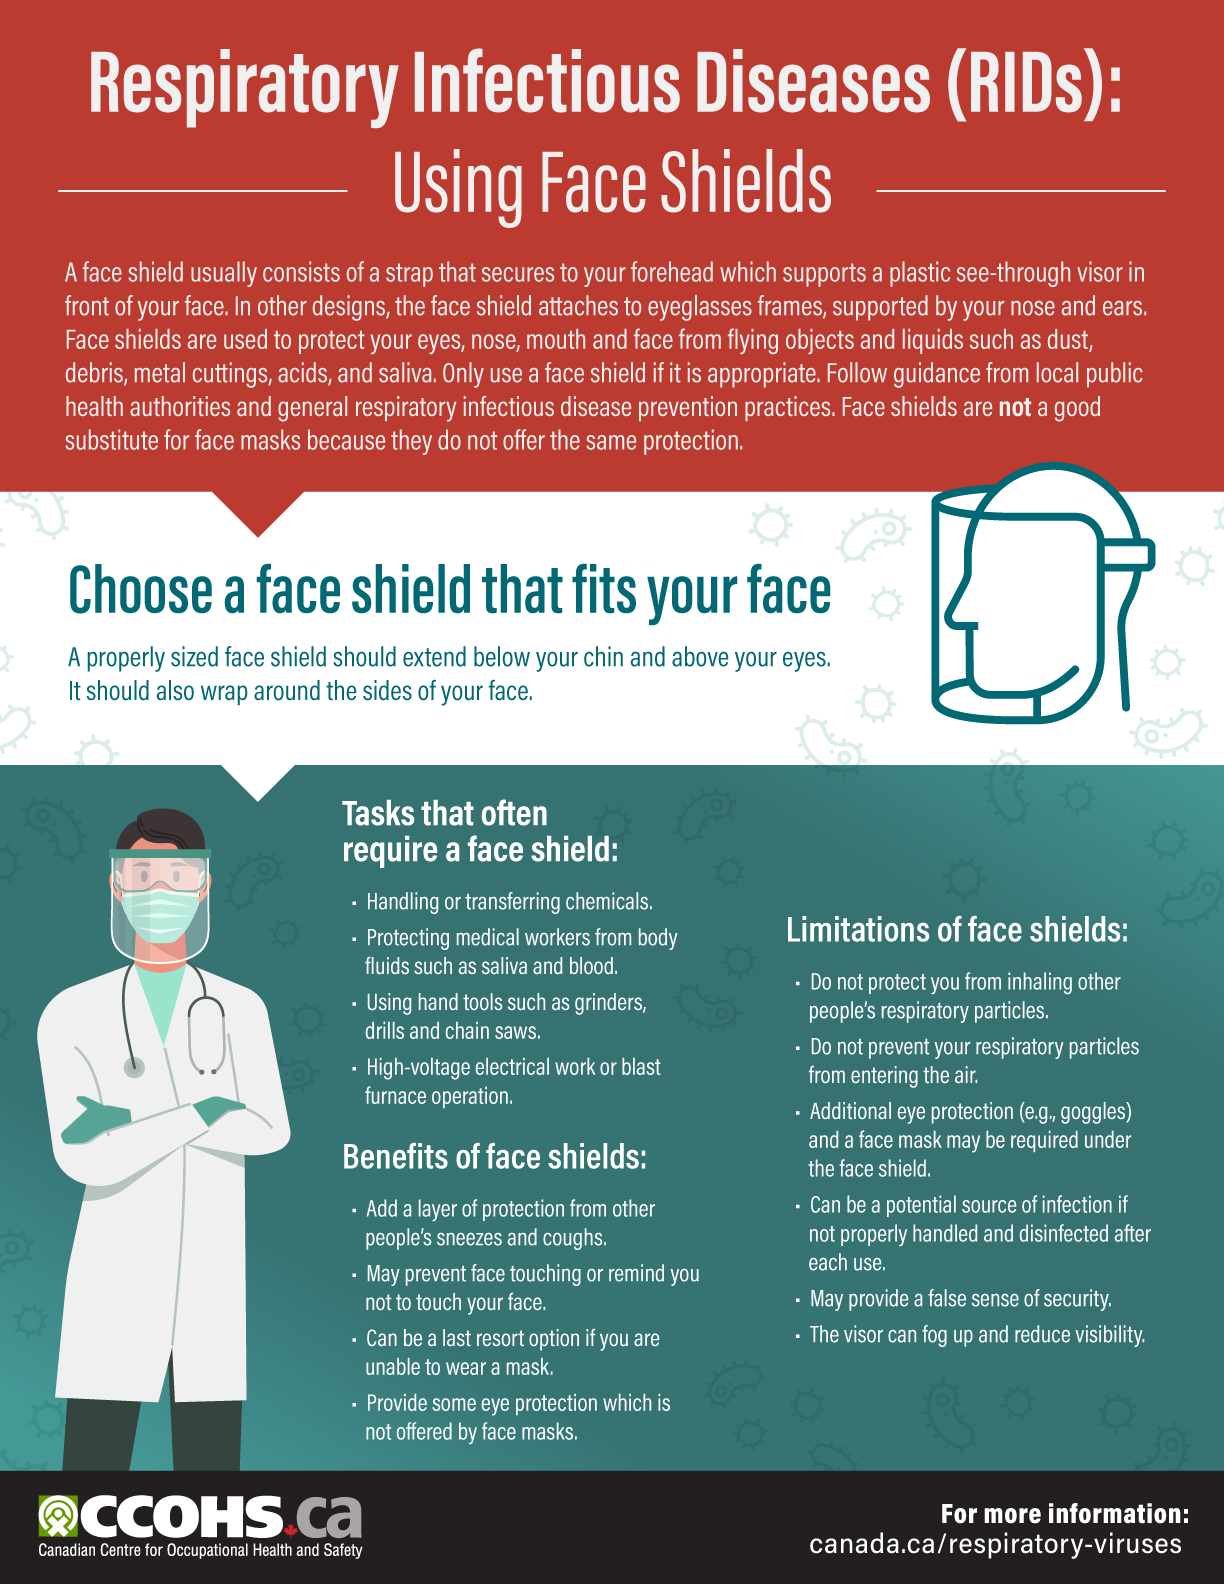 Infographic: Respiratory Infectious Diseases (RIDs): Using Face Shields